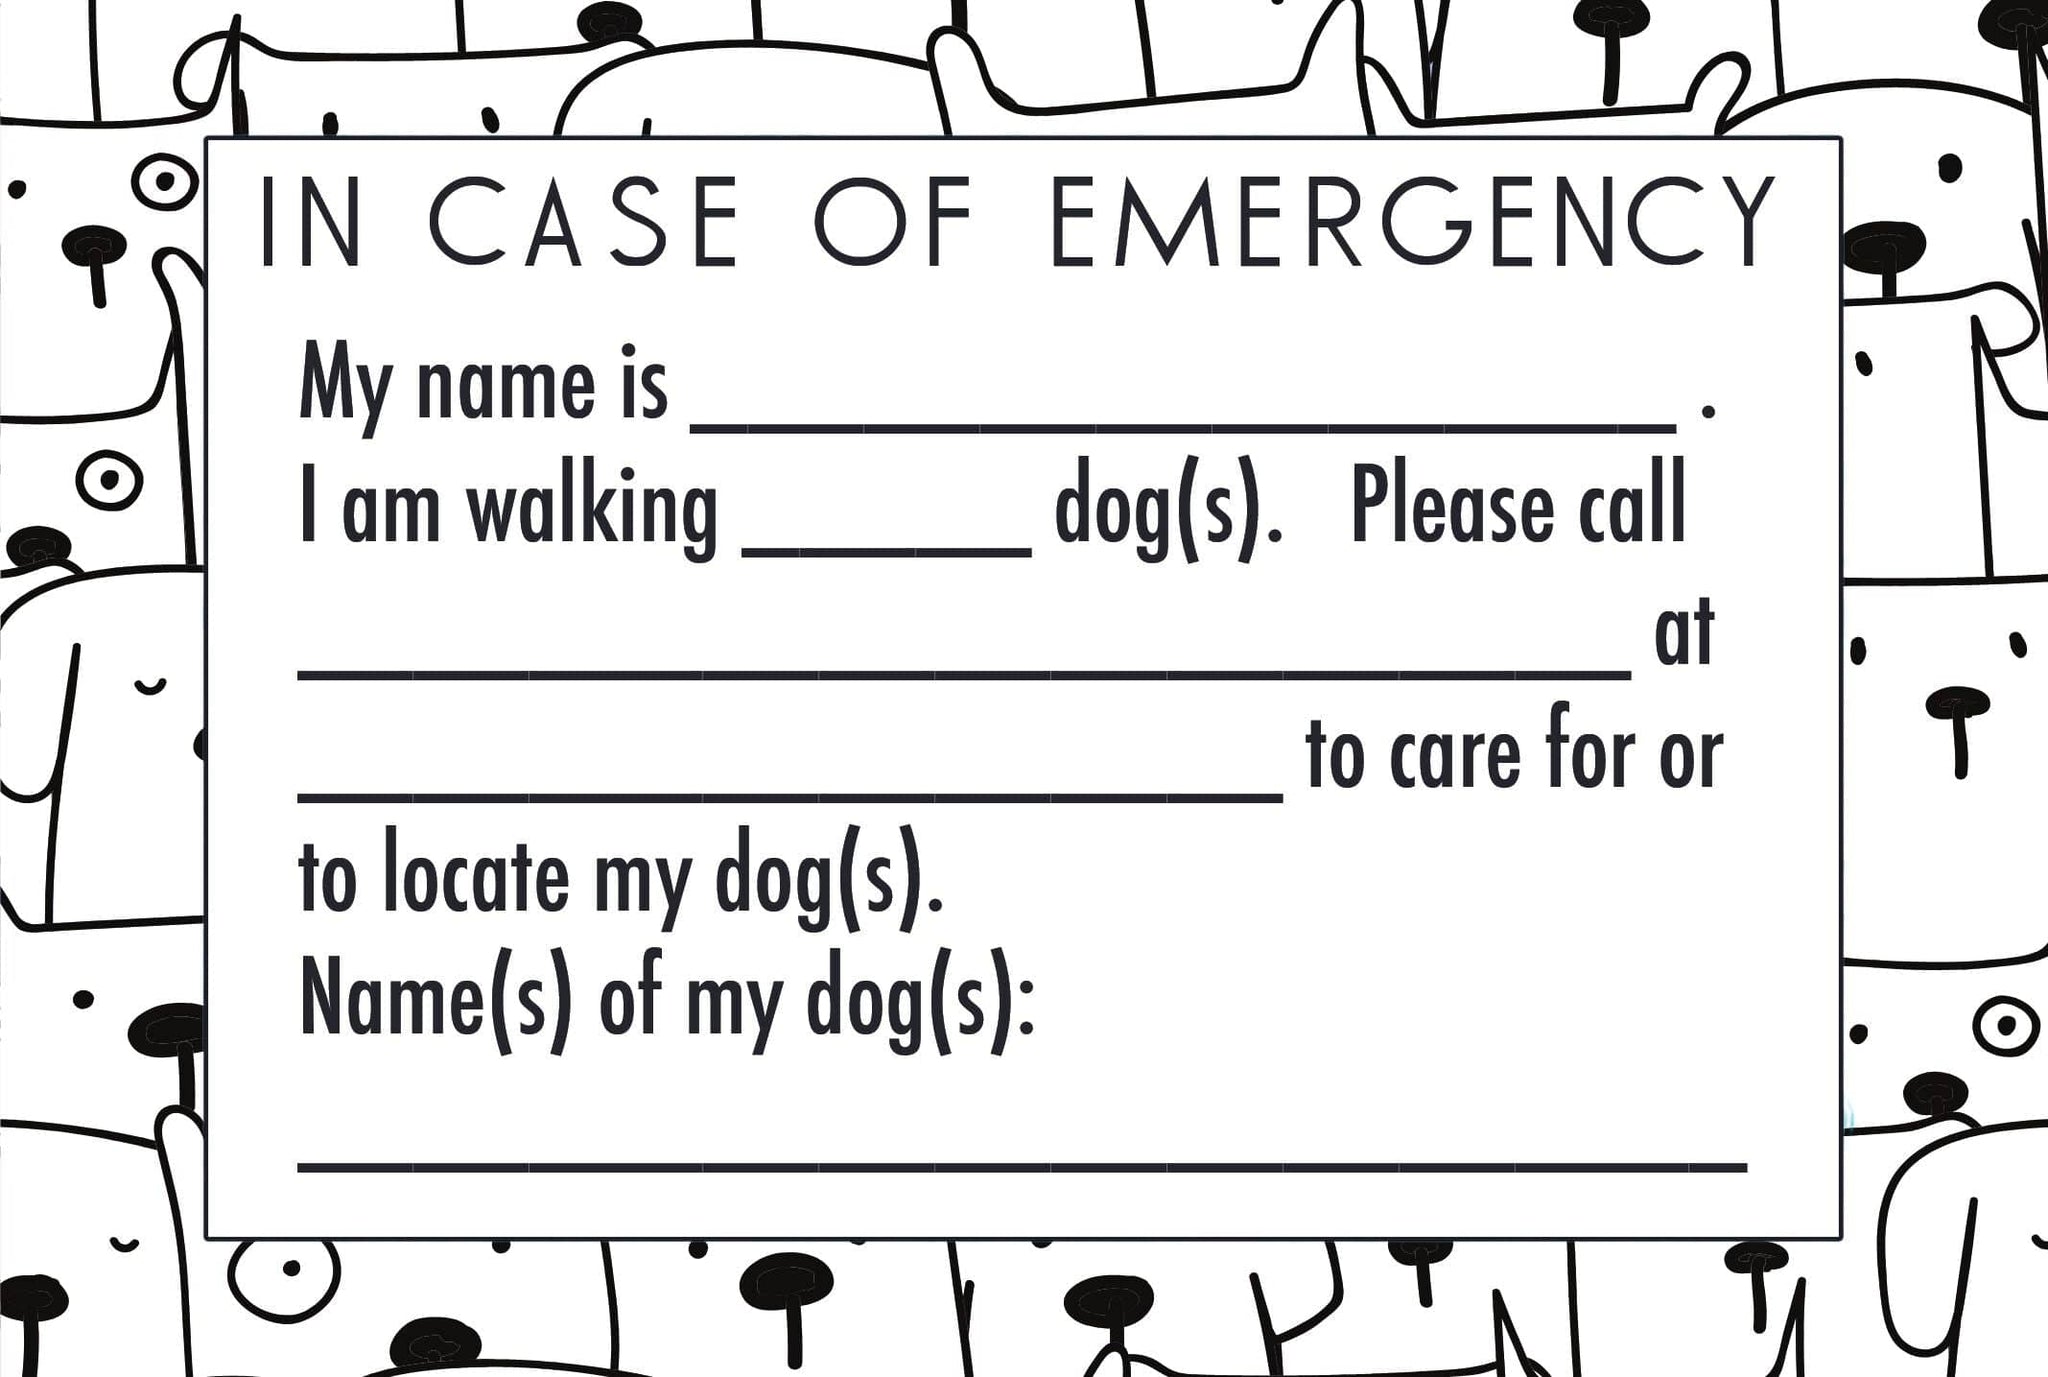 YUCKY PUPPY Digital Downloads Emergency Contacts for Dog Walkers Printable Card